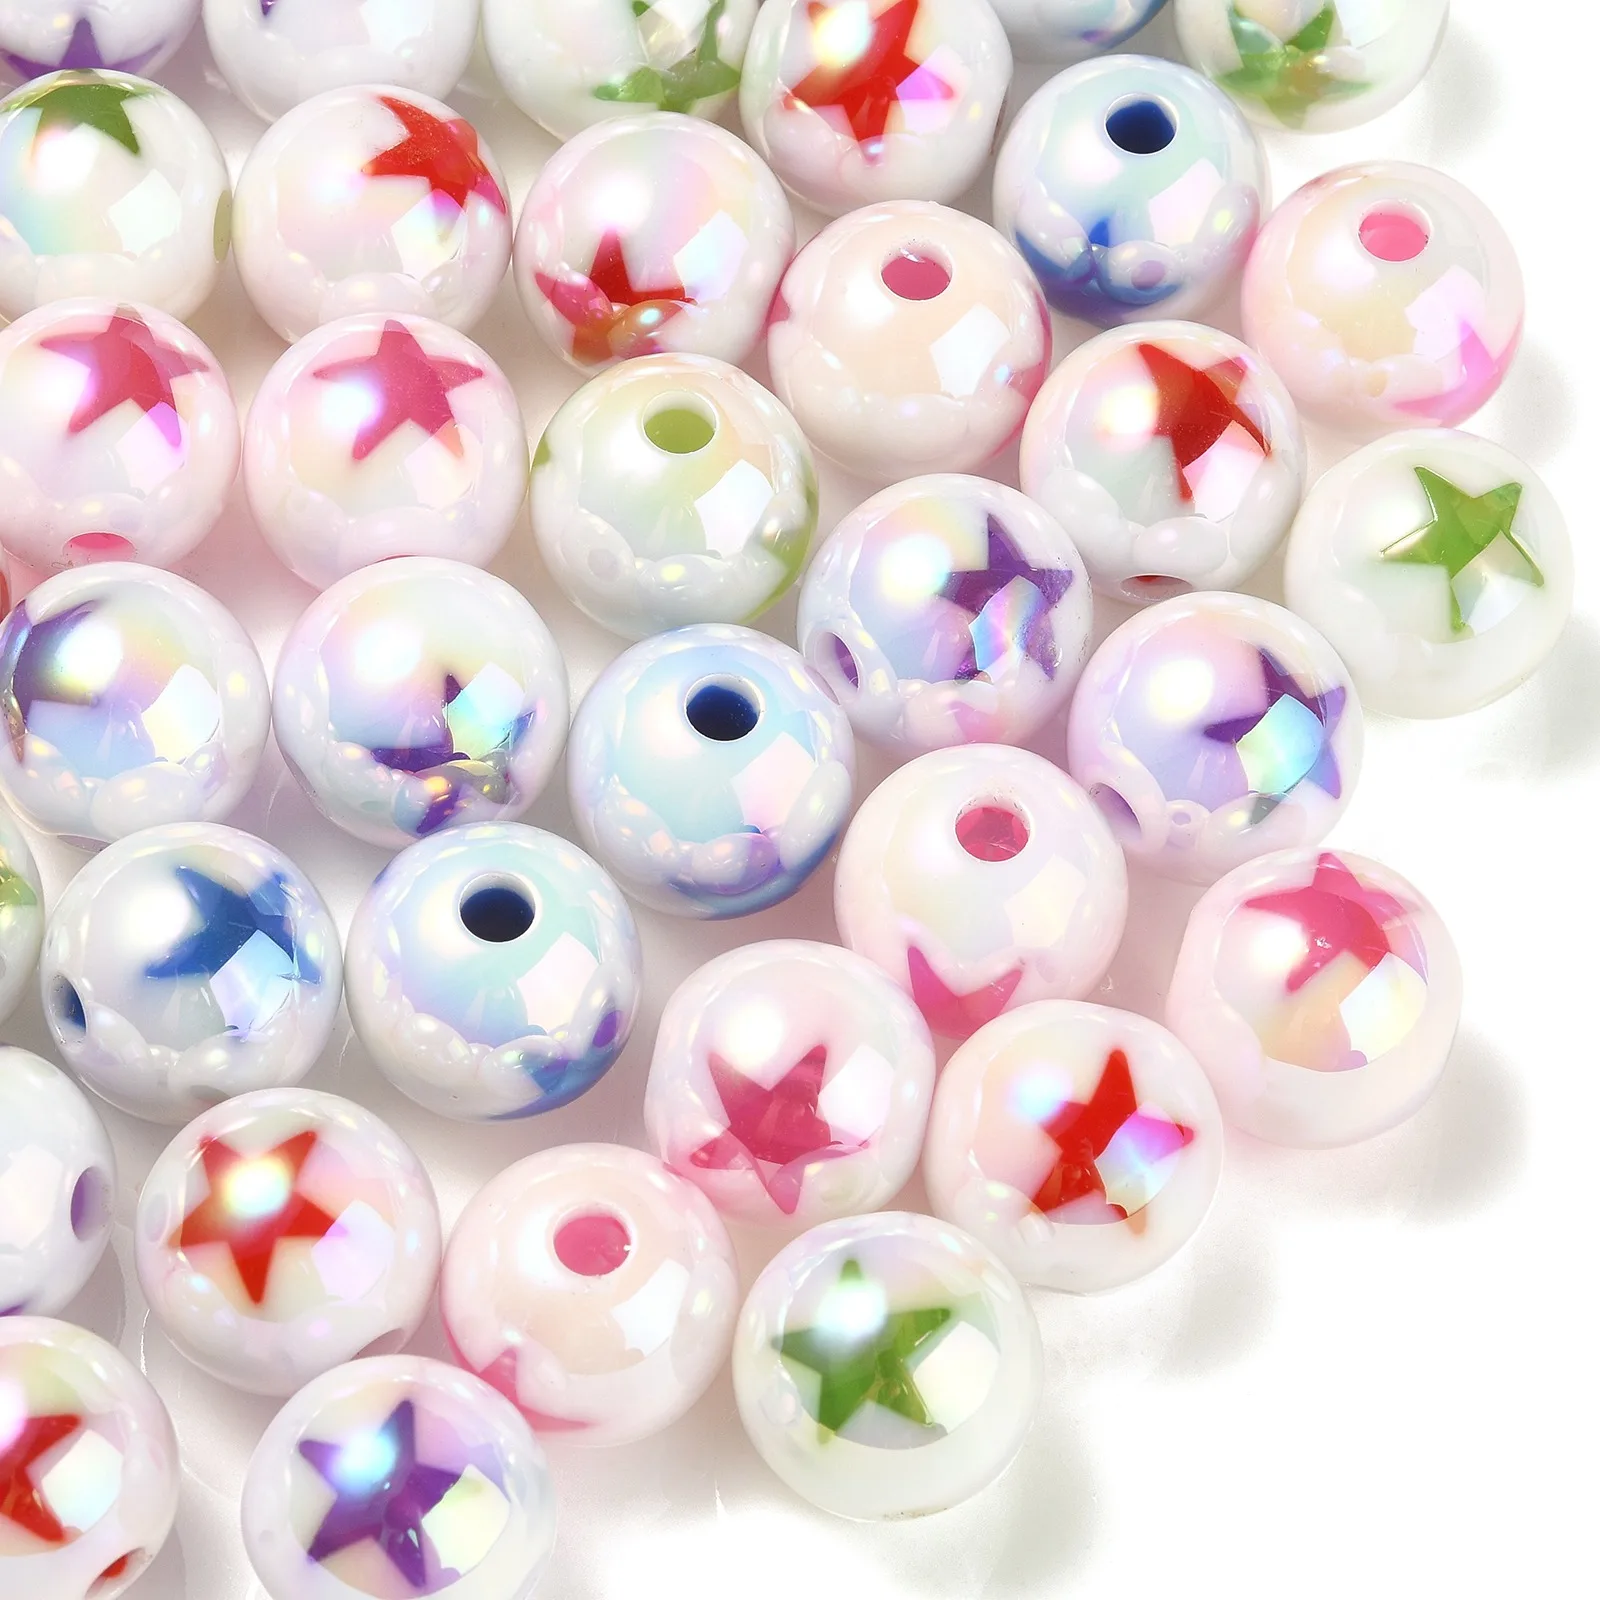 

PandaHall 100Pcs 16mm Acrylic Round with Star Pattern Beads Opaque Bubblegum Round Ball Spacer Beads for Jewelry Making DIY